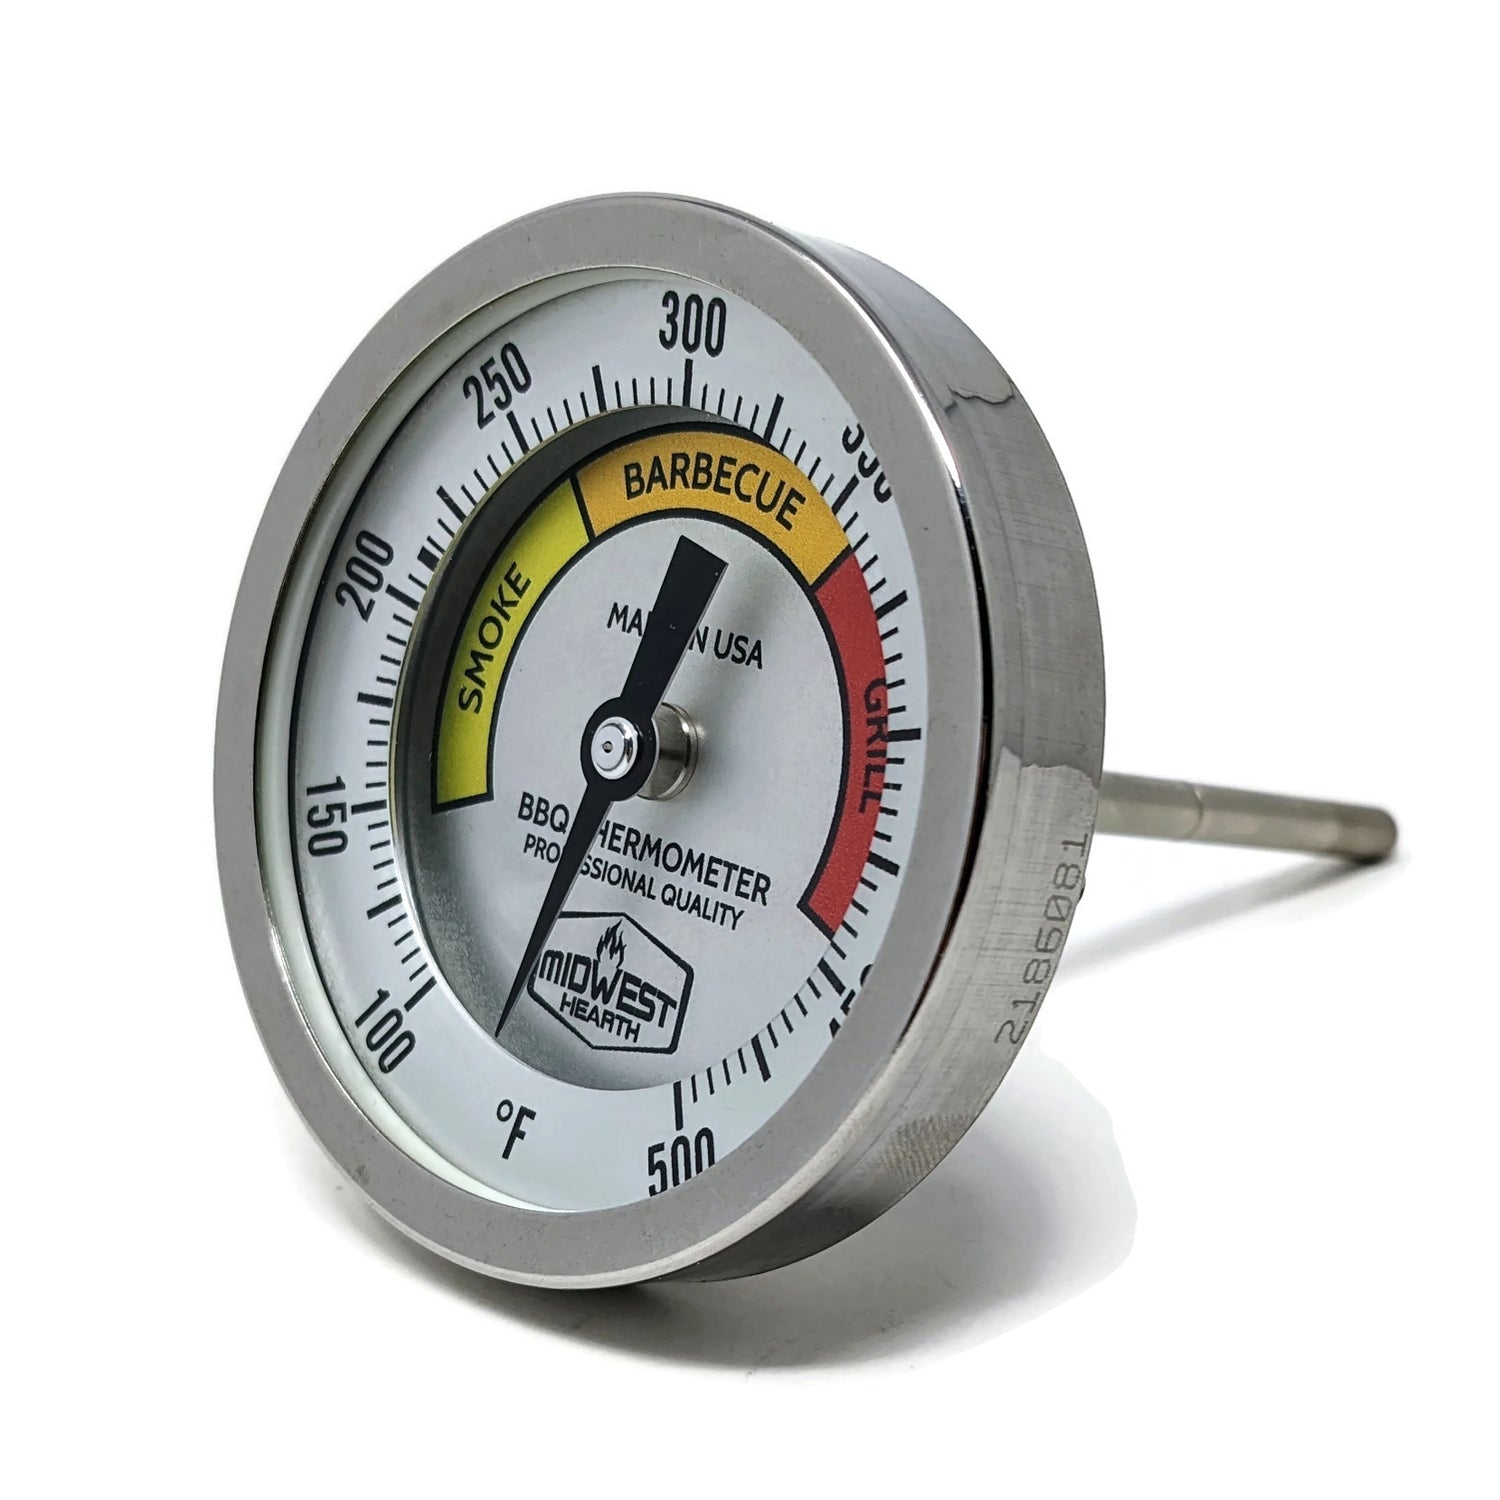 Deluxe BBQ Set: Instant Read Thermometer + BBQ Tools